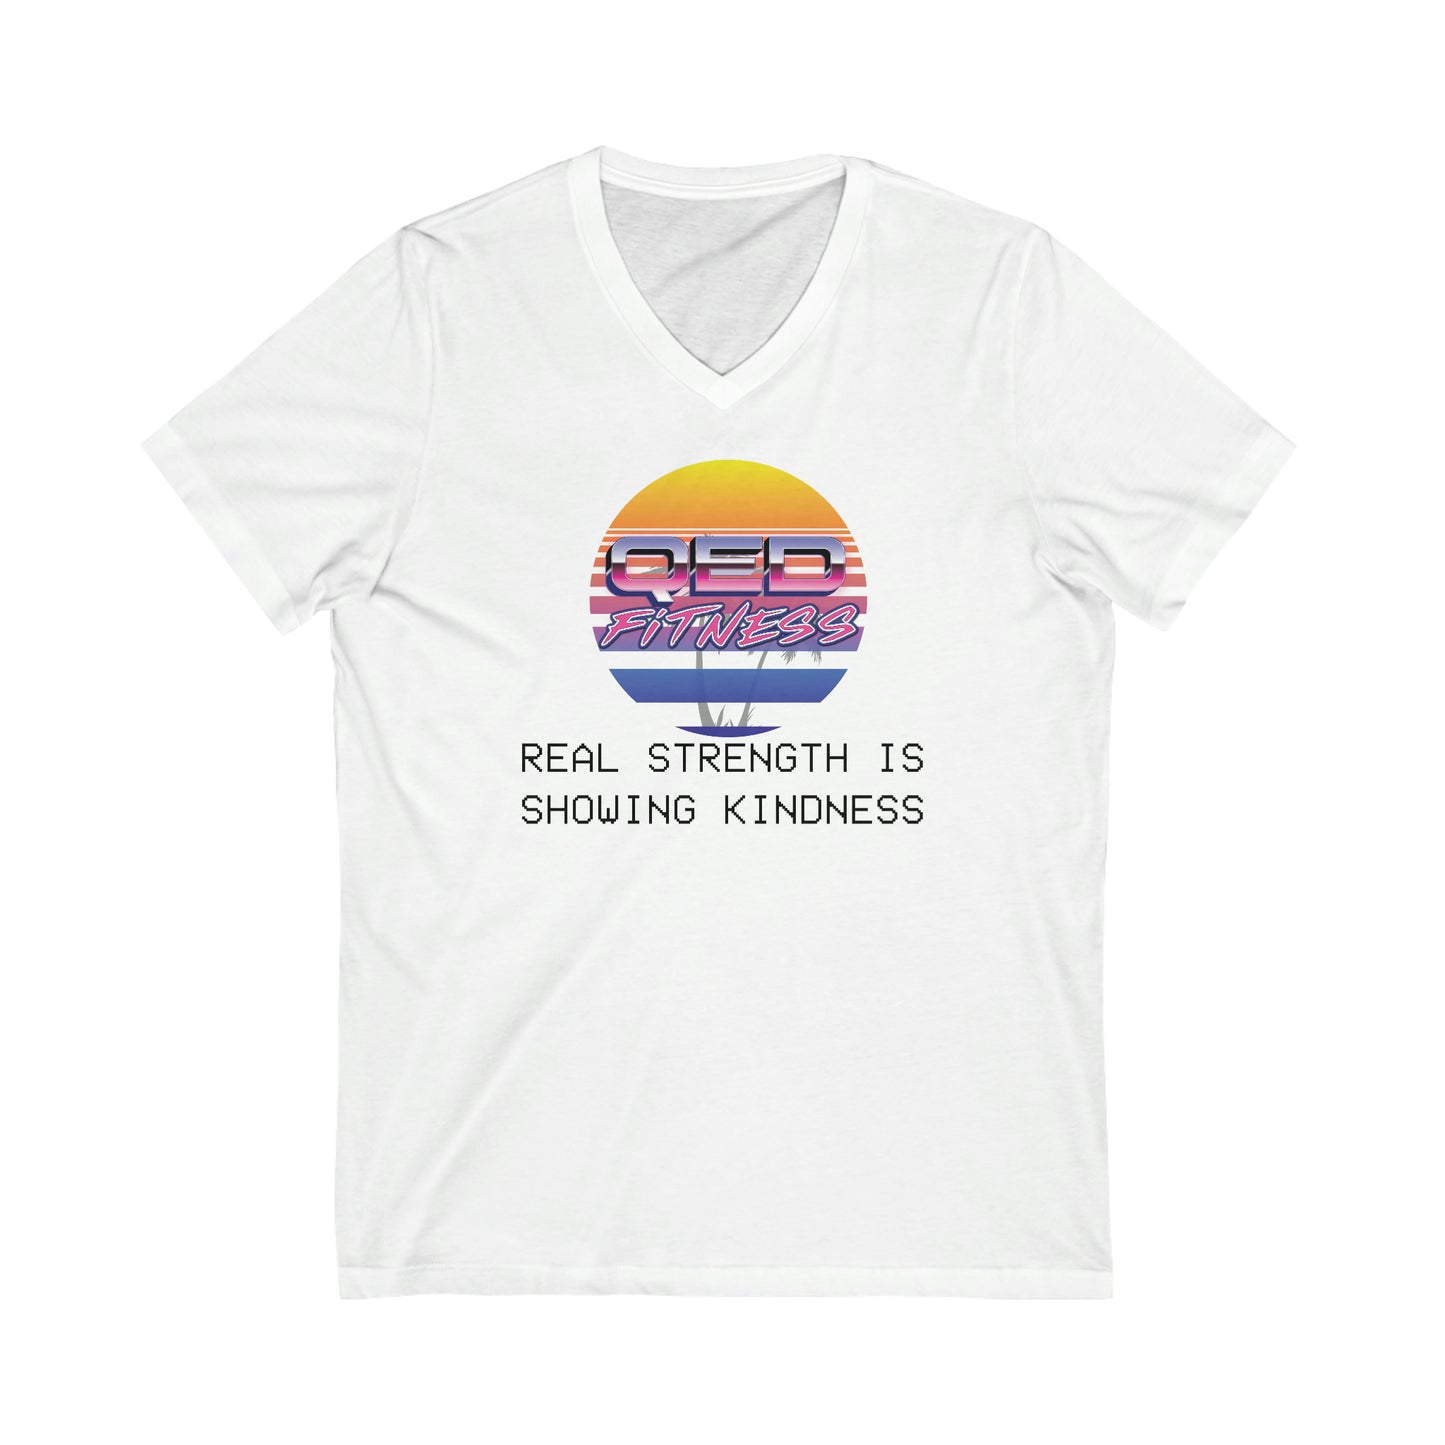 Real Strength is Showing Kindness V Neck Shirt